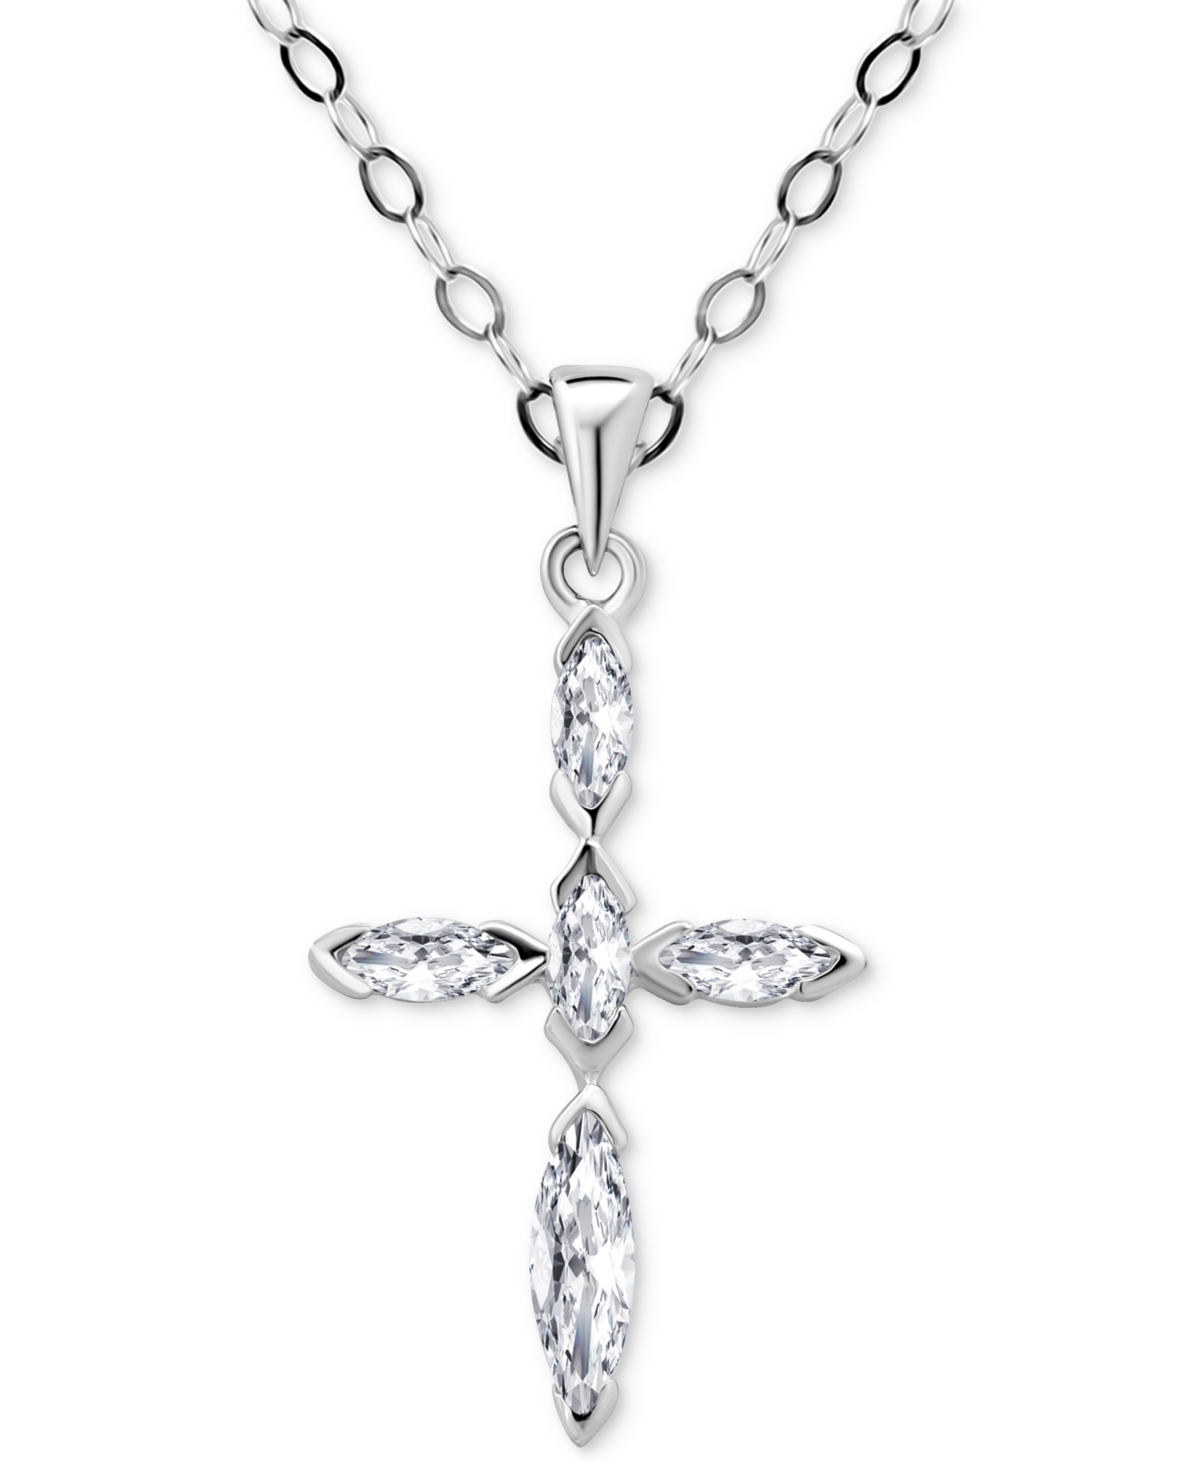 Giani Bernini Cubic Zirconia Marquise Cross Pendant Necklace In Sterling Silver, 16" + 2" Extender, Created For Ma